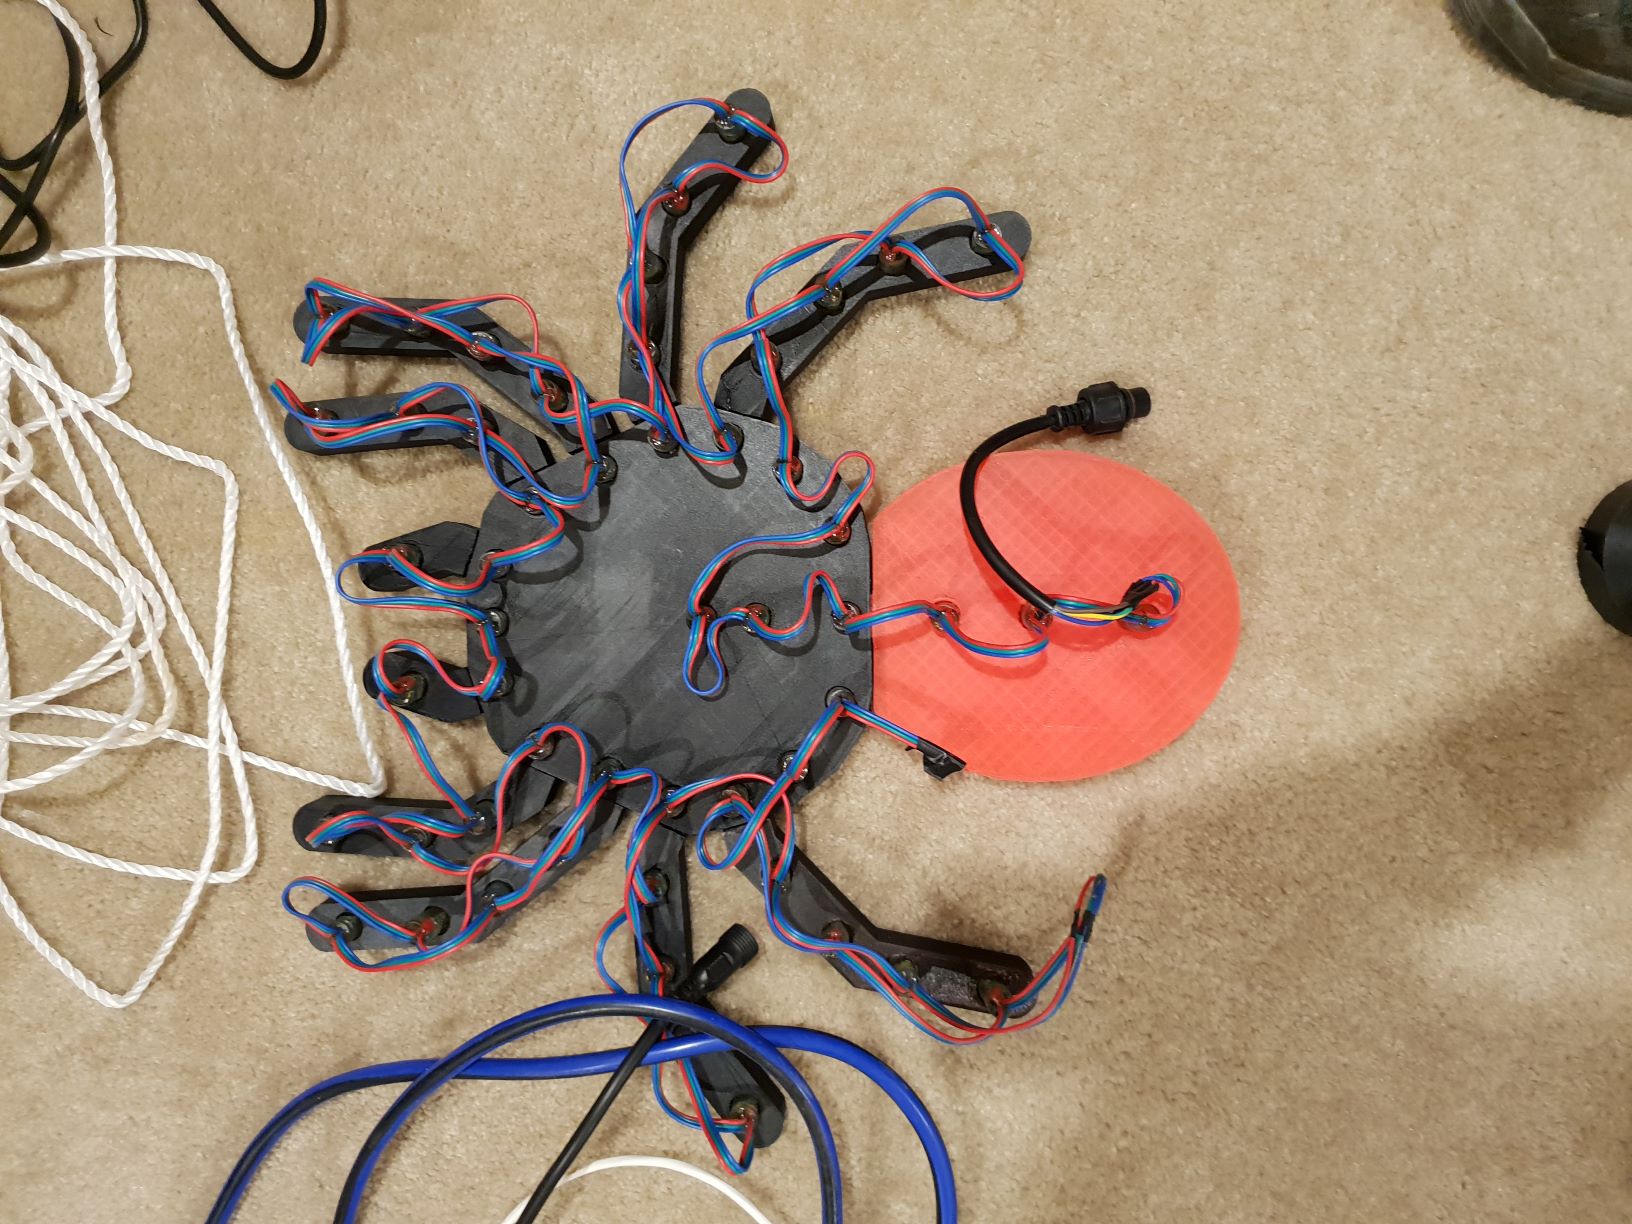 3D Printed Spider(small)